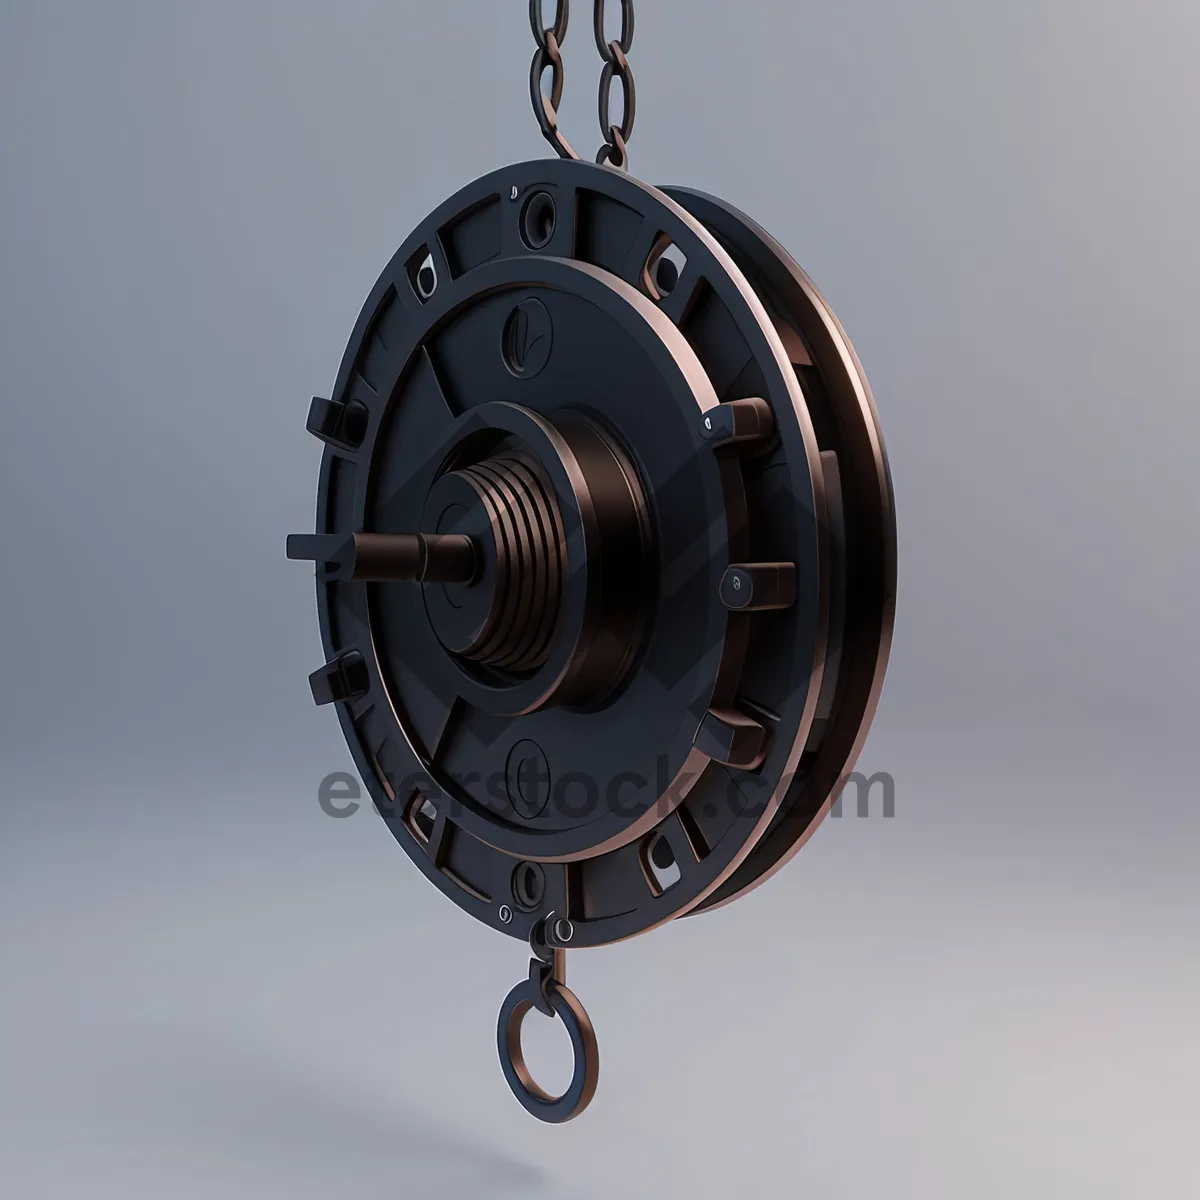 Picture of Metal Chime Machine: Percussion Mechanism with Chain